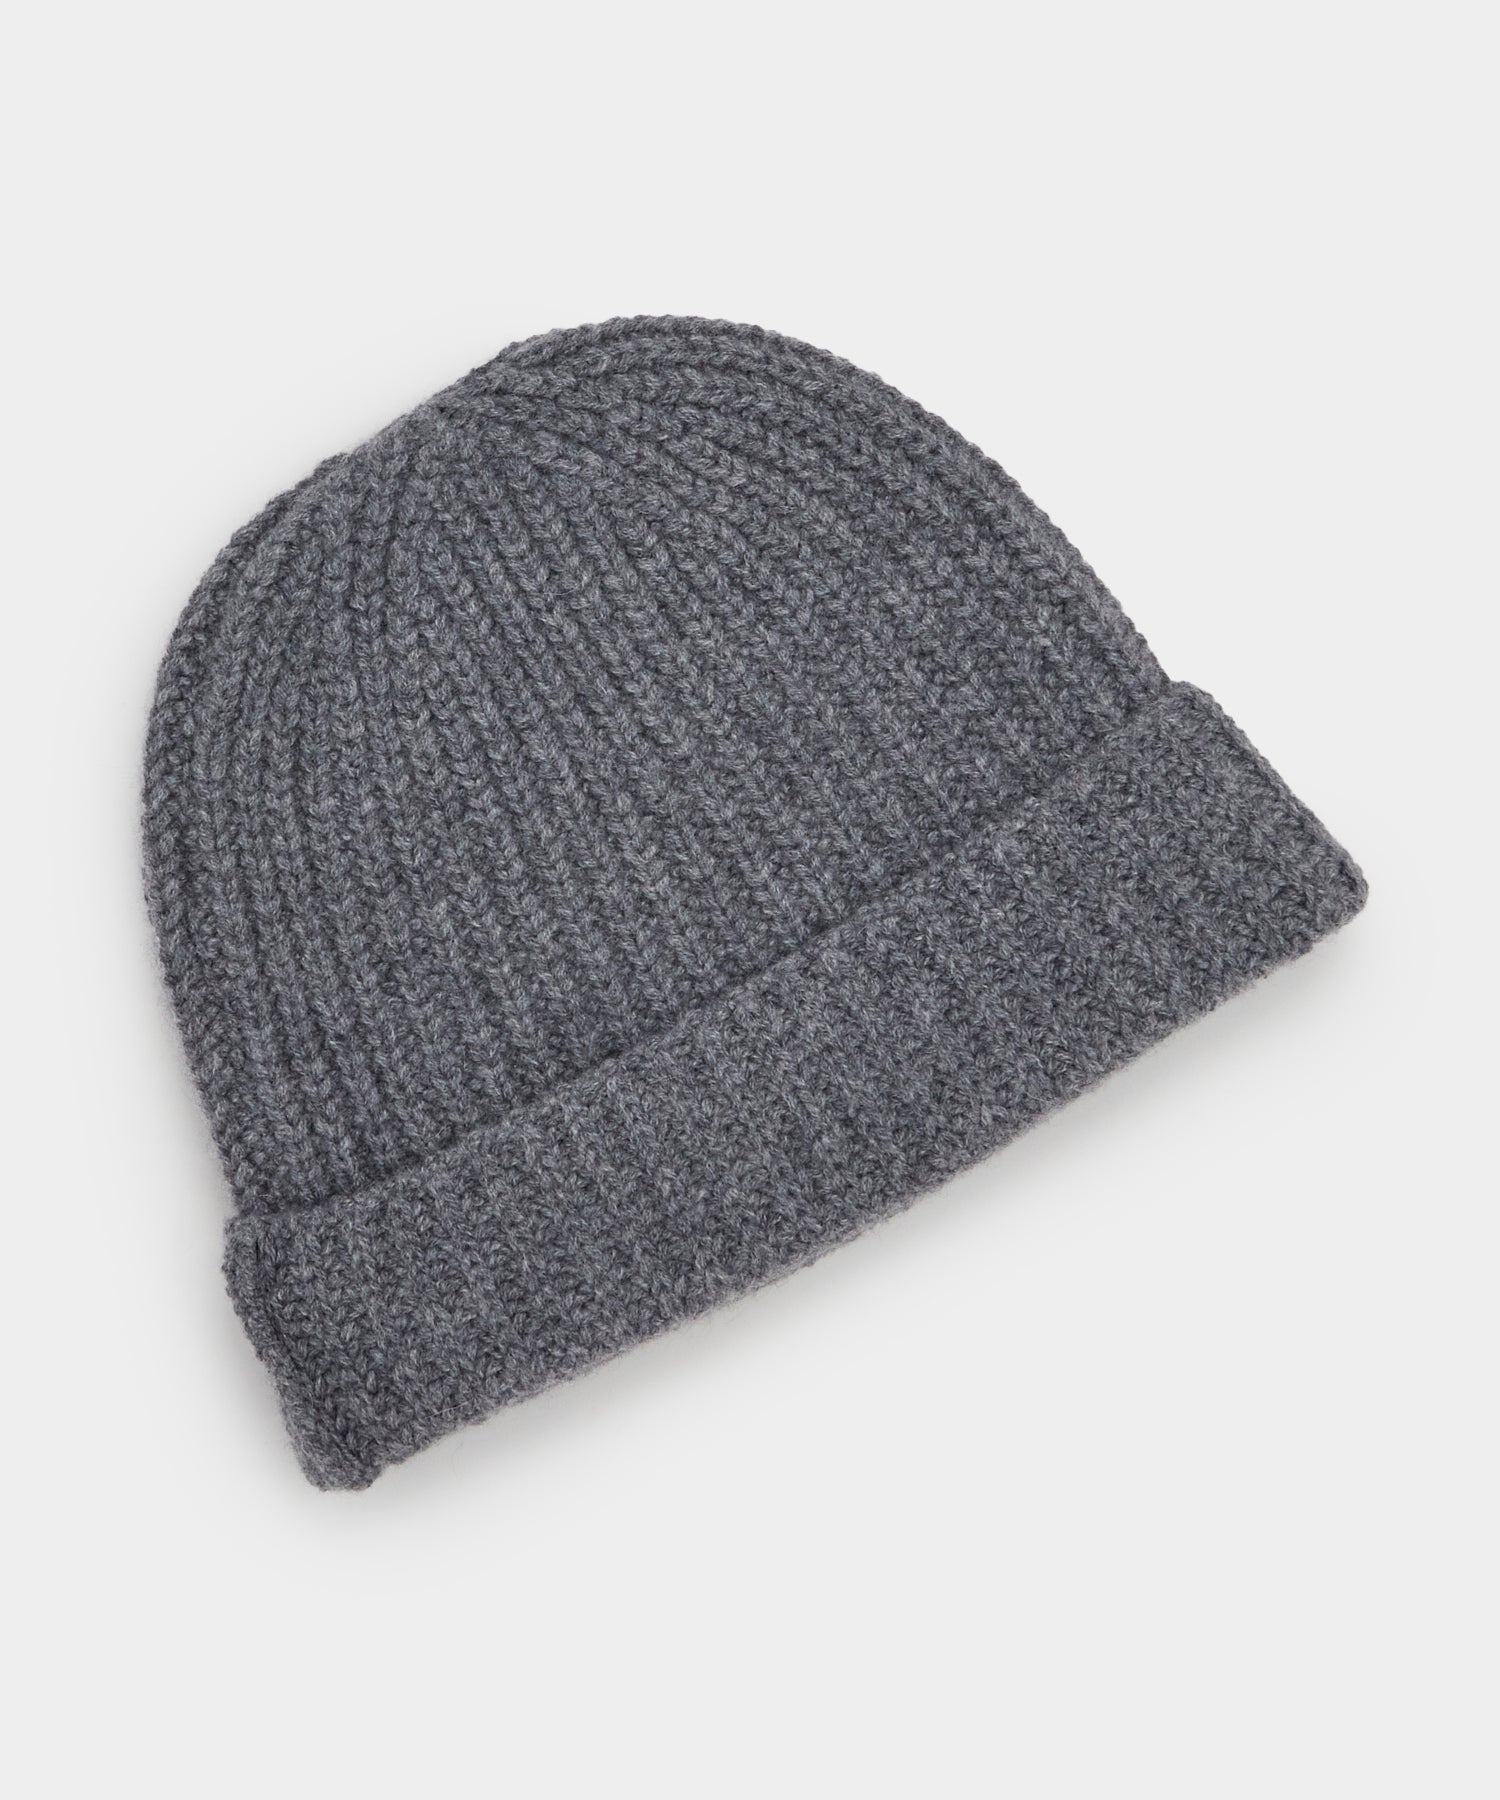 Italian Recycled Cashmere Beanie in Charcoal